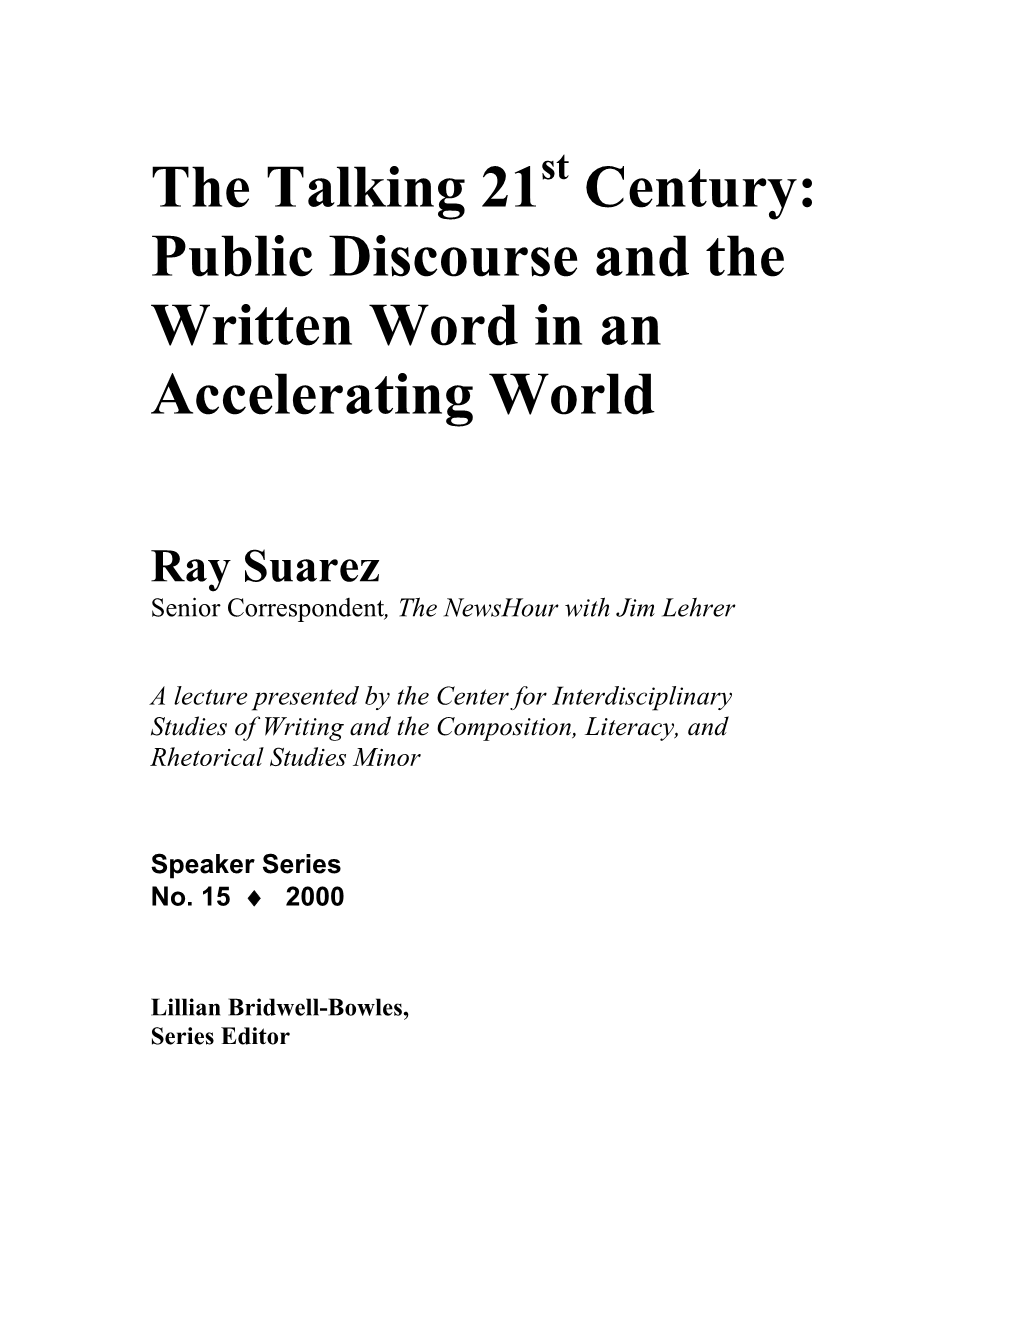 Public Discourse and the Written Word in An